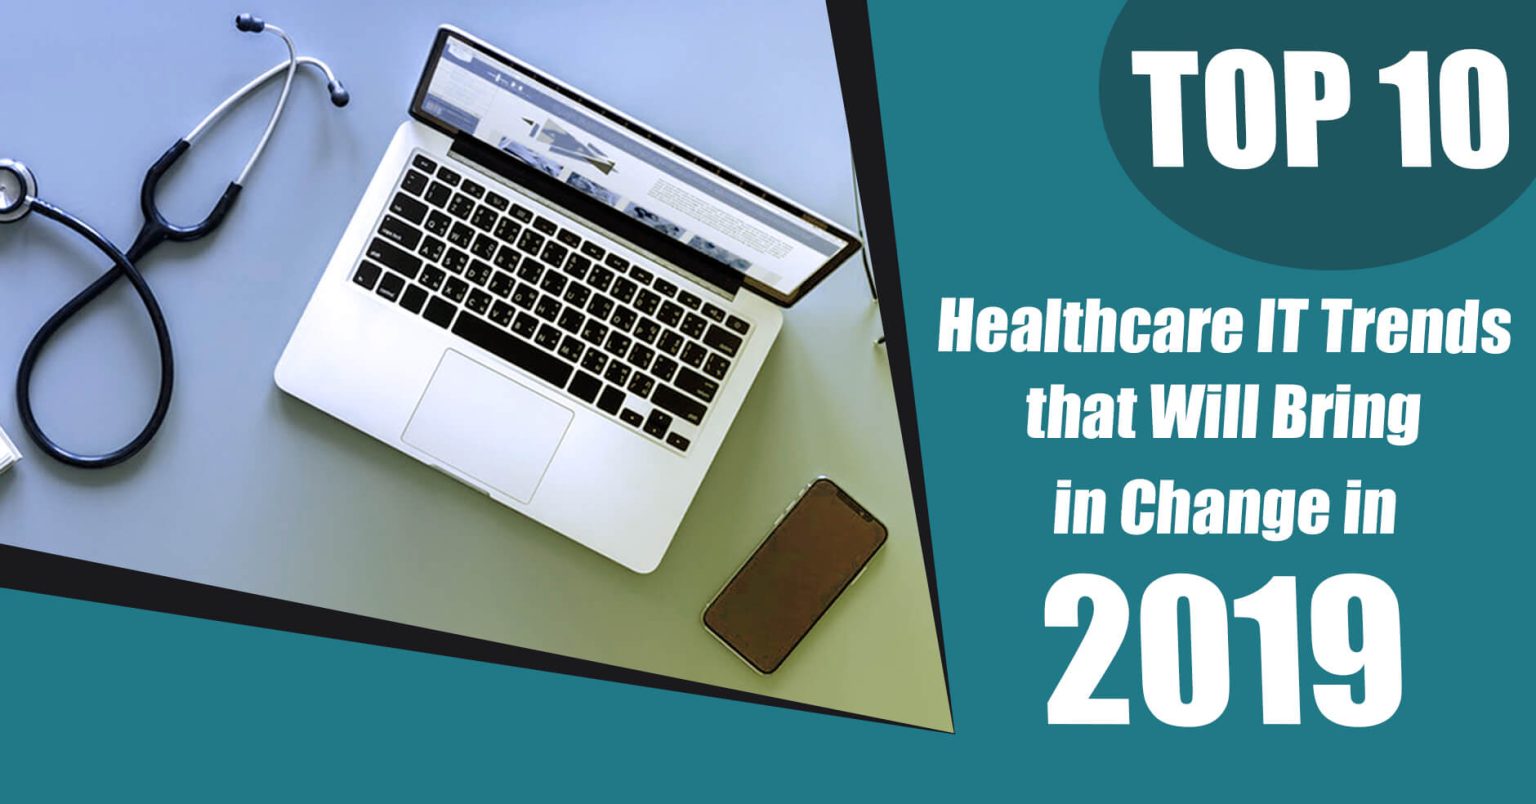 Top 10 Healthcare IT Trends that Will Bring in Change in 2019 - MedicoReach